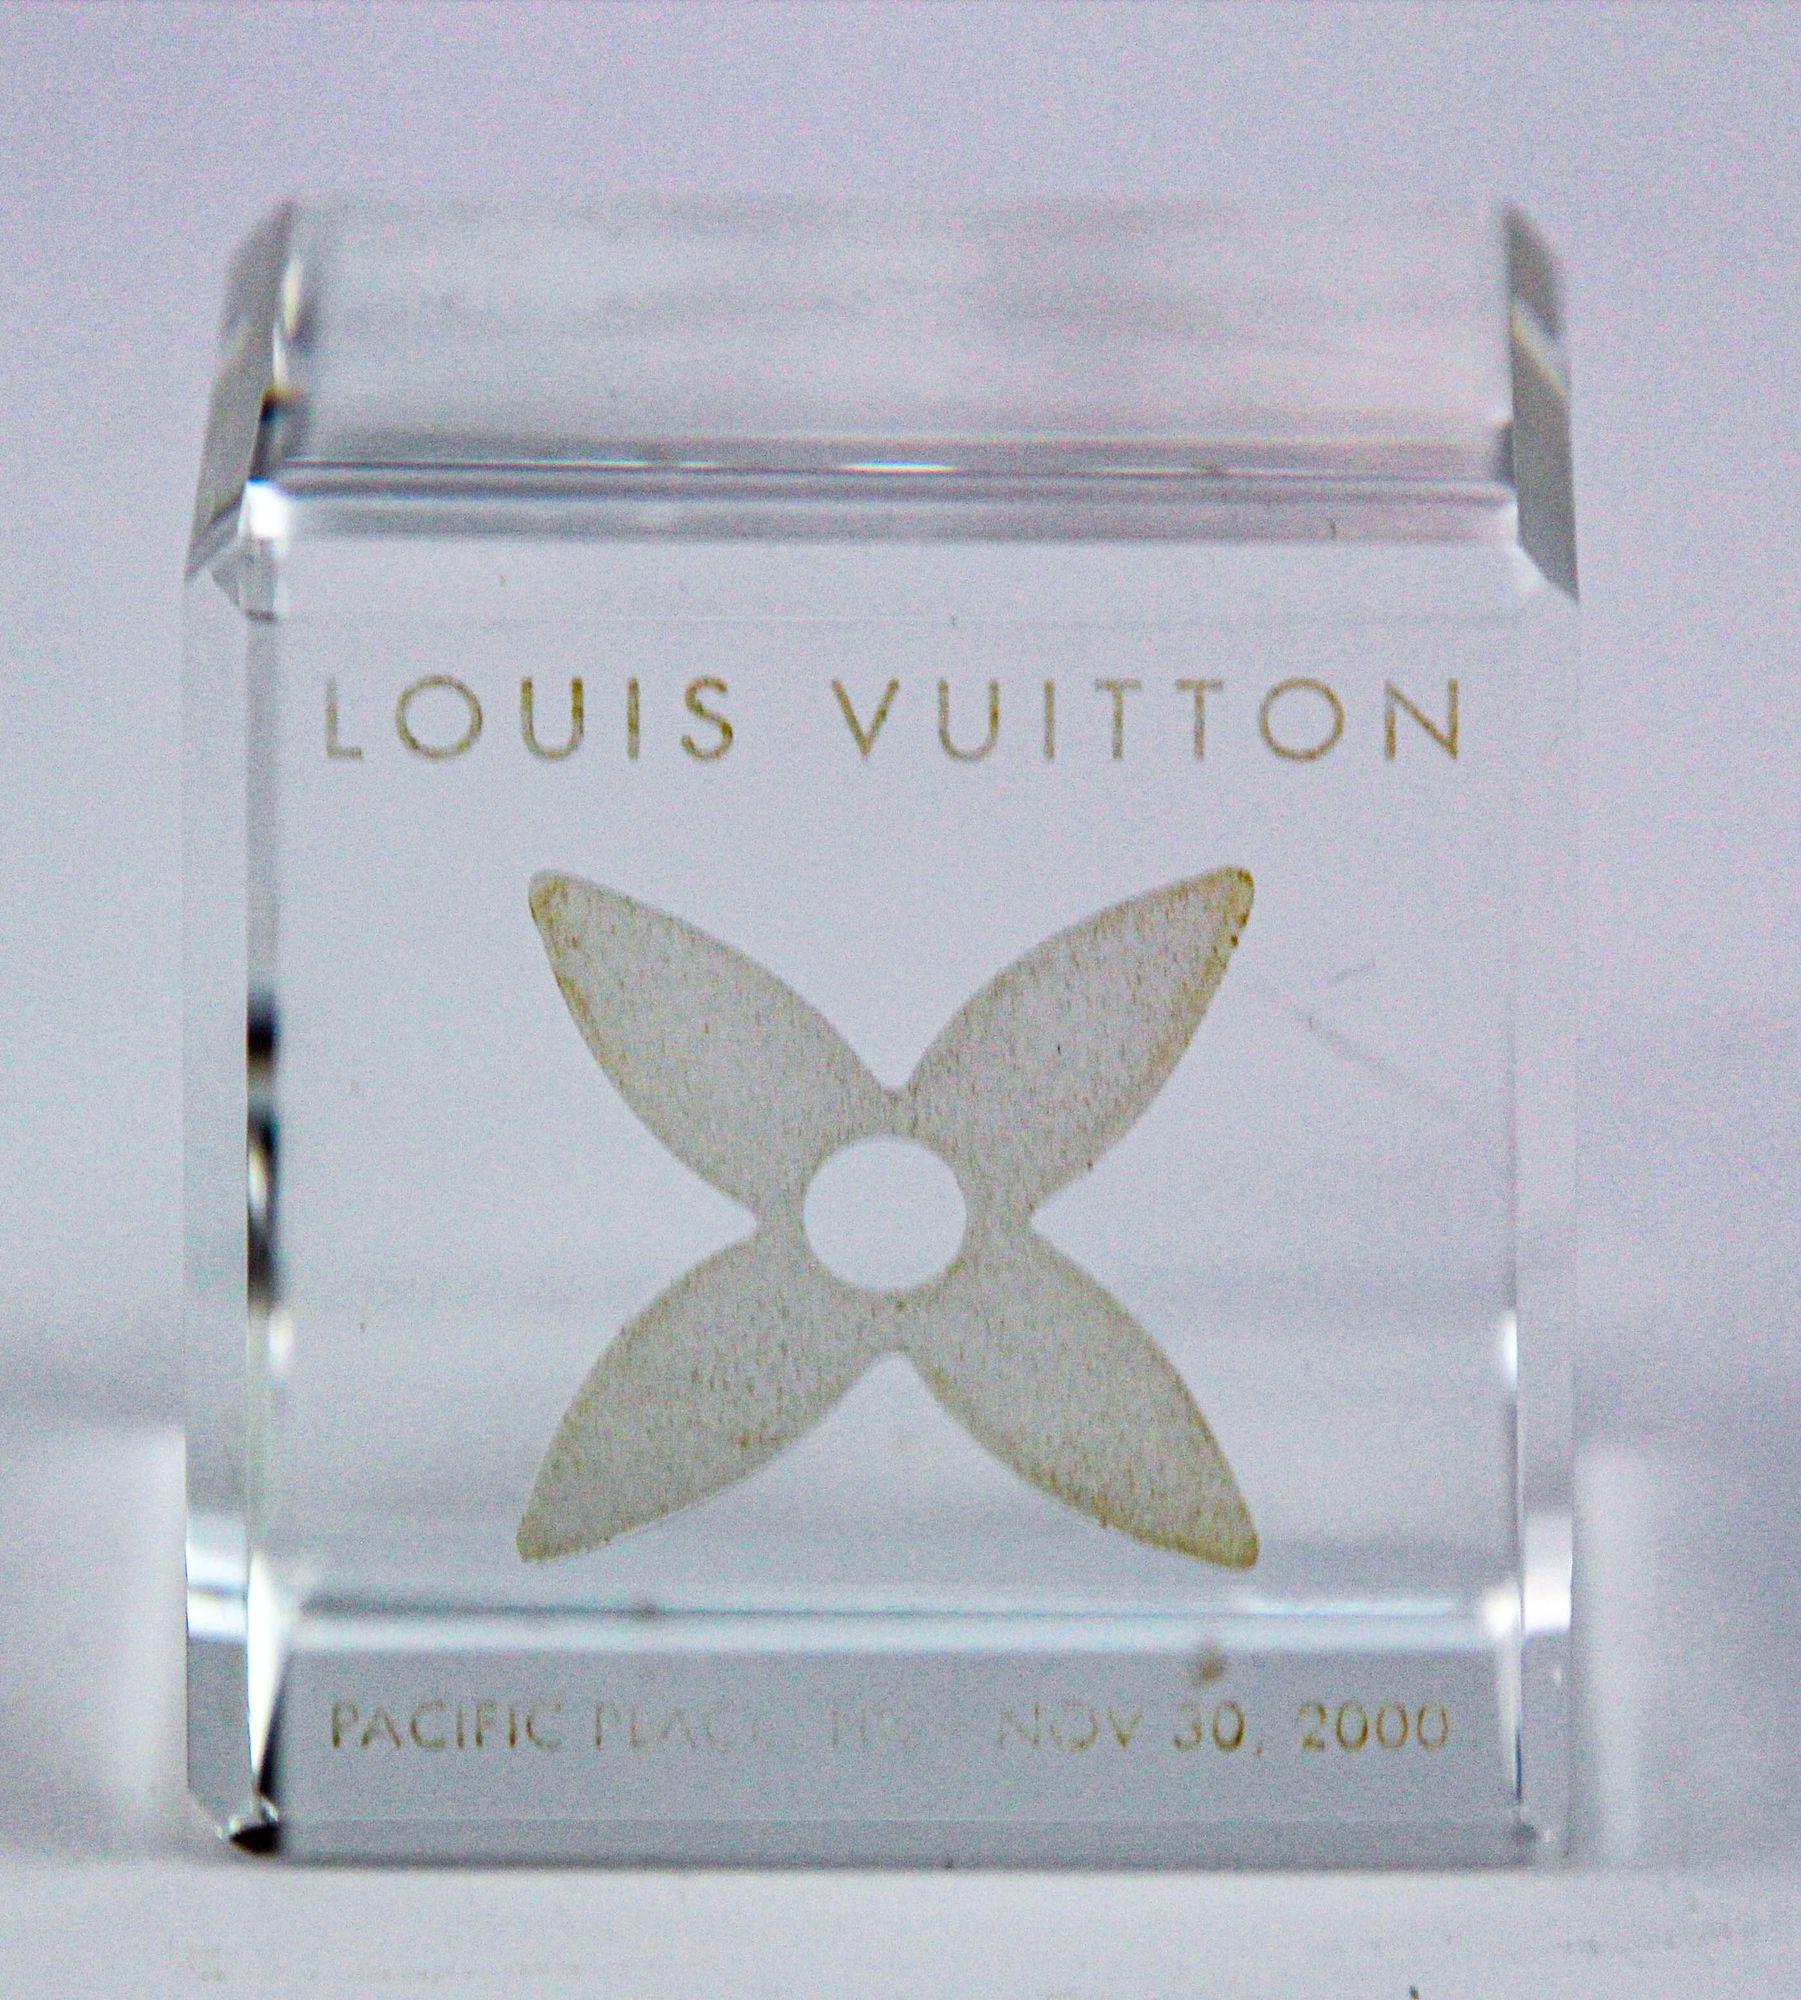 This LOUIS VUITTON Cube is made up crystal.
The faces represent the monogram of the brand.
Collector's item that can also be used as a paperweight on your desktop.
VIP gift dating from 2000 from Louis Vuitton Hong Kong date 2000.
This LOUIS VUITTON